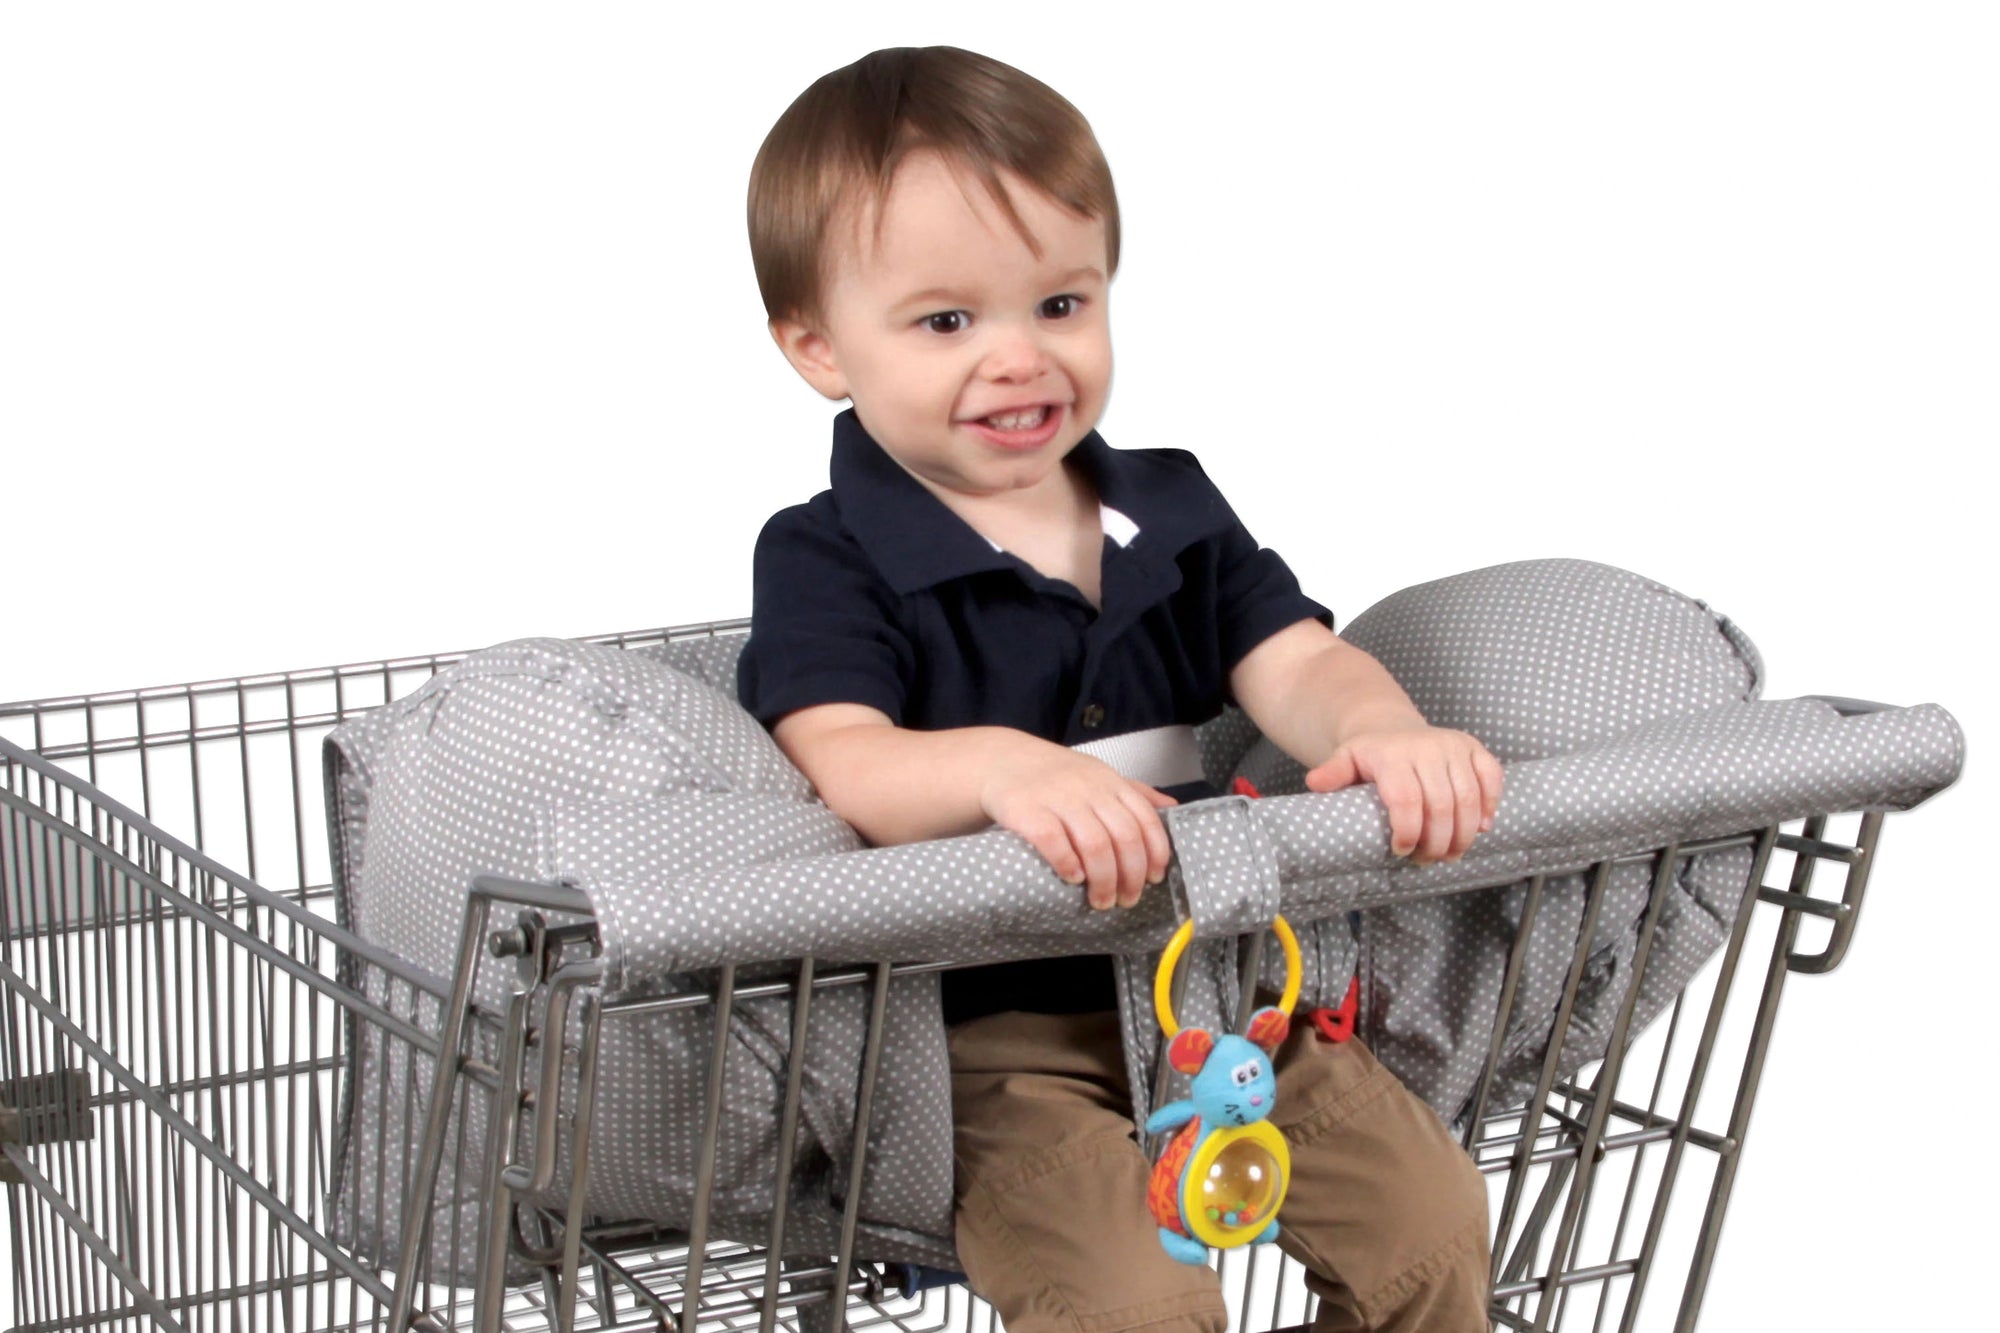 Prop R Shopper with child in cart in Gray Pin Dot